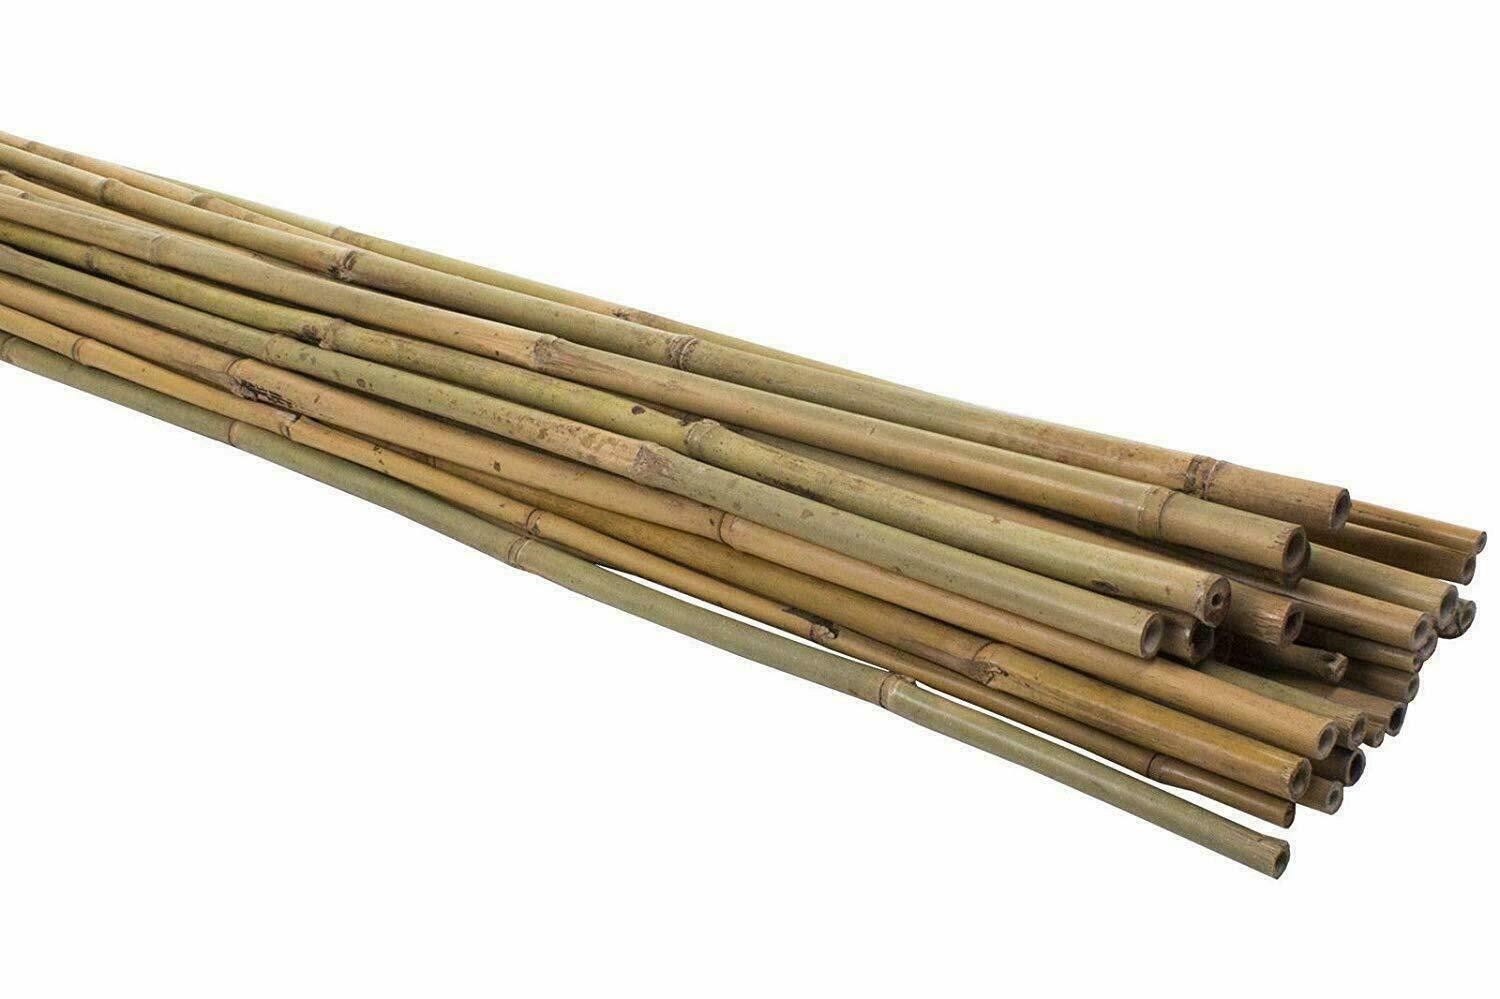 8-10mm Bamboo Stakes - 3' - 25 pk